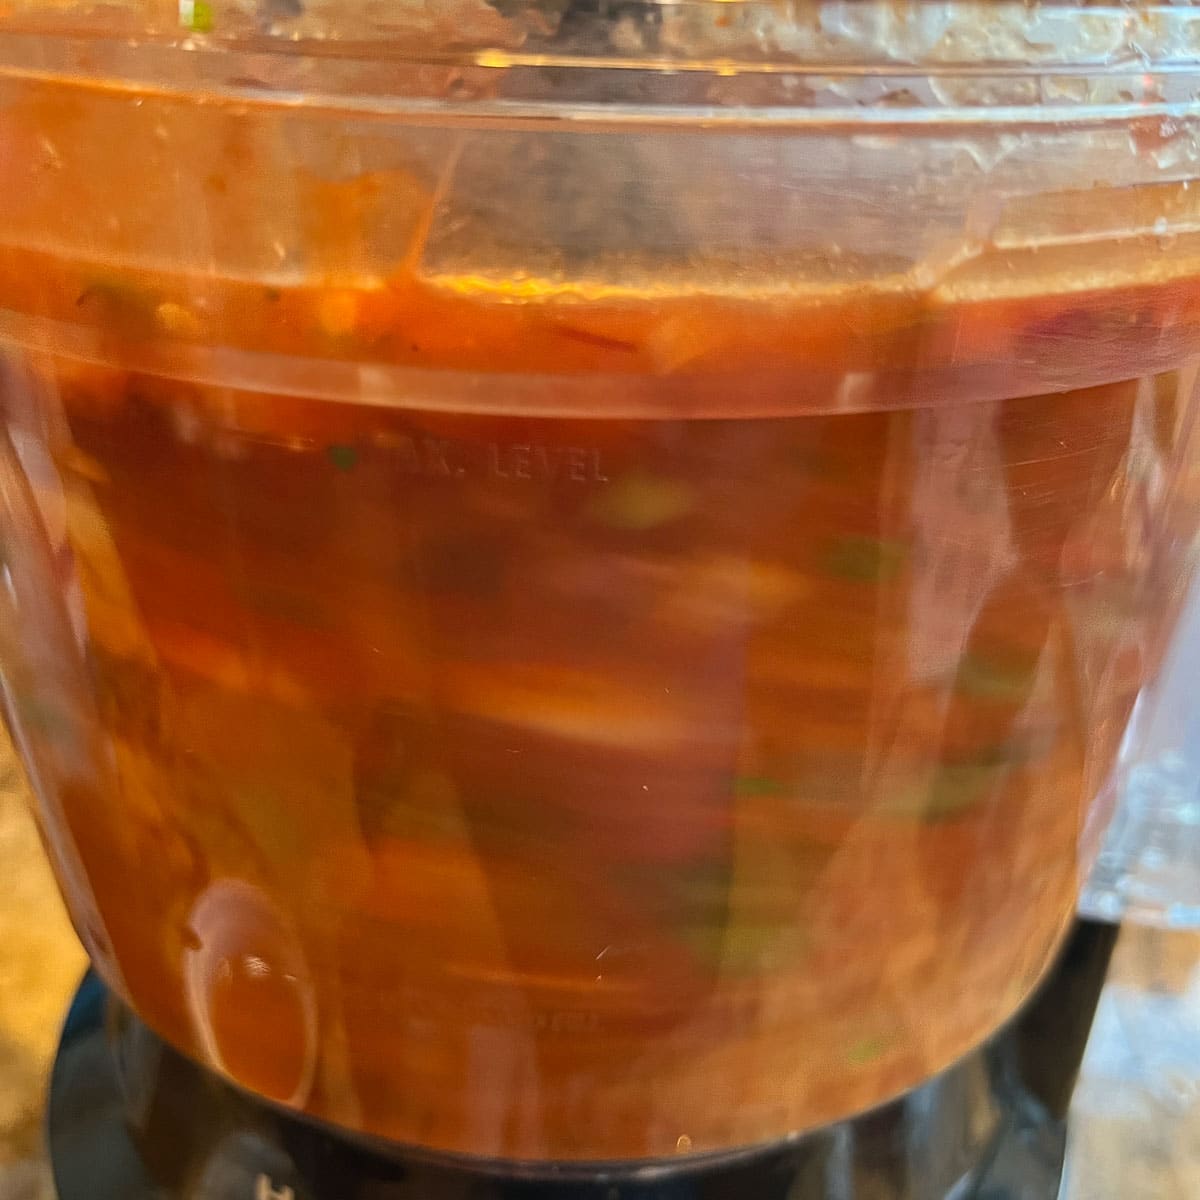 blending canned salsa ingredients in a food processor